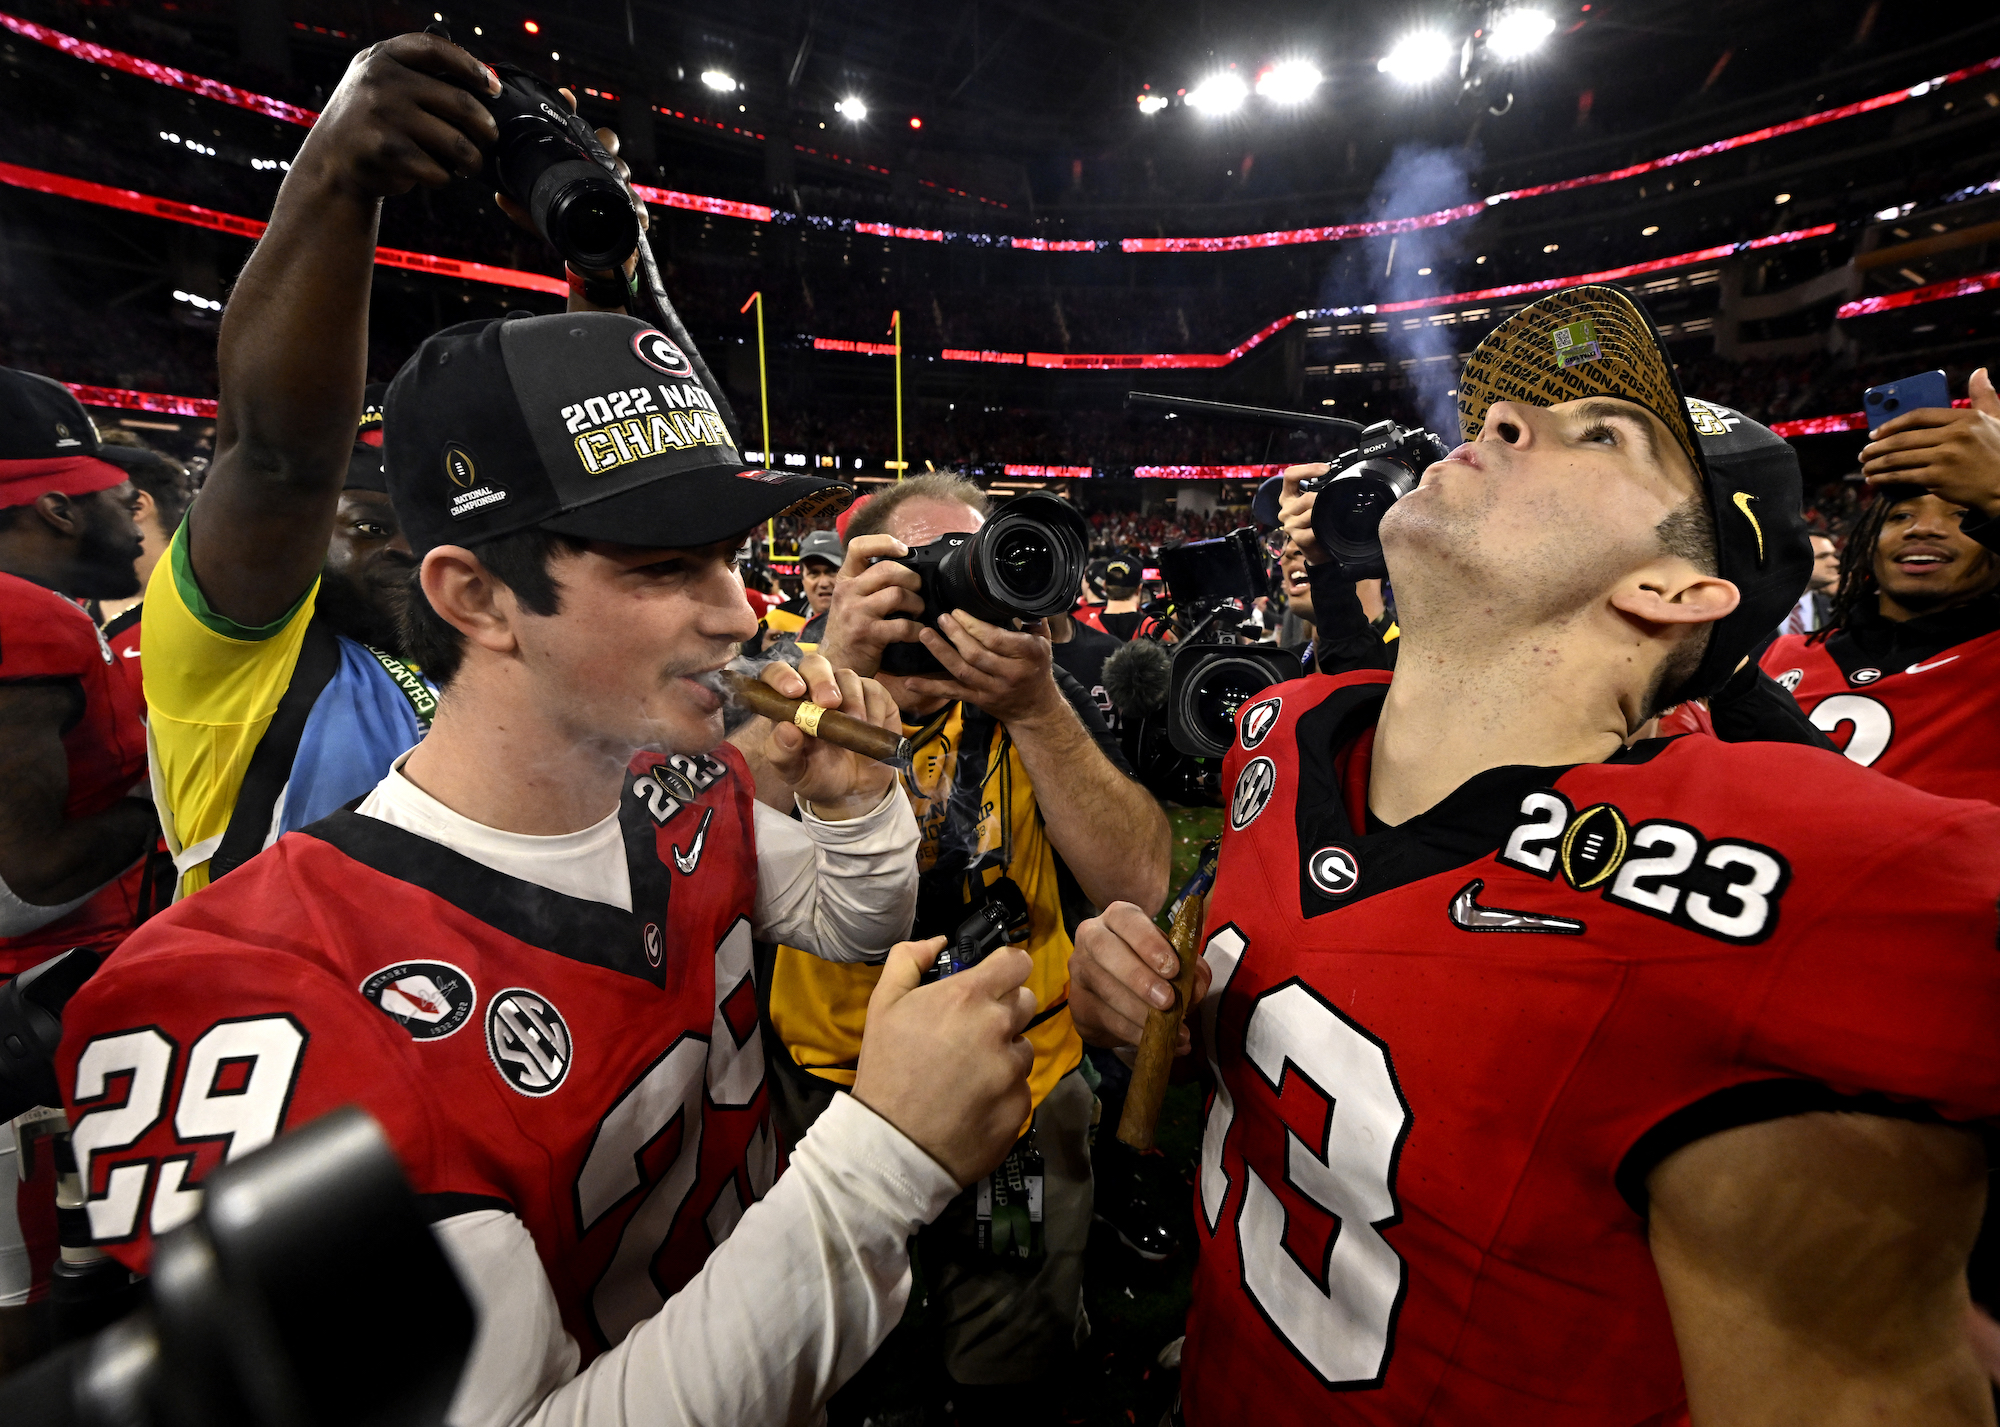 Inglewood, CA - January 09: Quarterback Stetson Bennett #13 of the Georgia Bulldogs lights a cigar with teammate wide receiver Luke Bennett #29 of the Georgia Bulldogs after defeating the TCU Horned Frogs 65-7 to win the CFP National Championship Football game at SoFi Stadium in Inglewood on Monday, January 9, 2023. (Photo by Keith Birmingham/MediaNews Group/Pasadena Star-News via Getty Images)